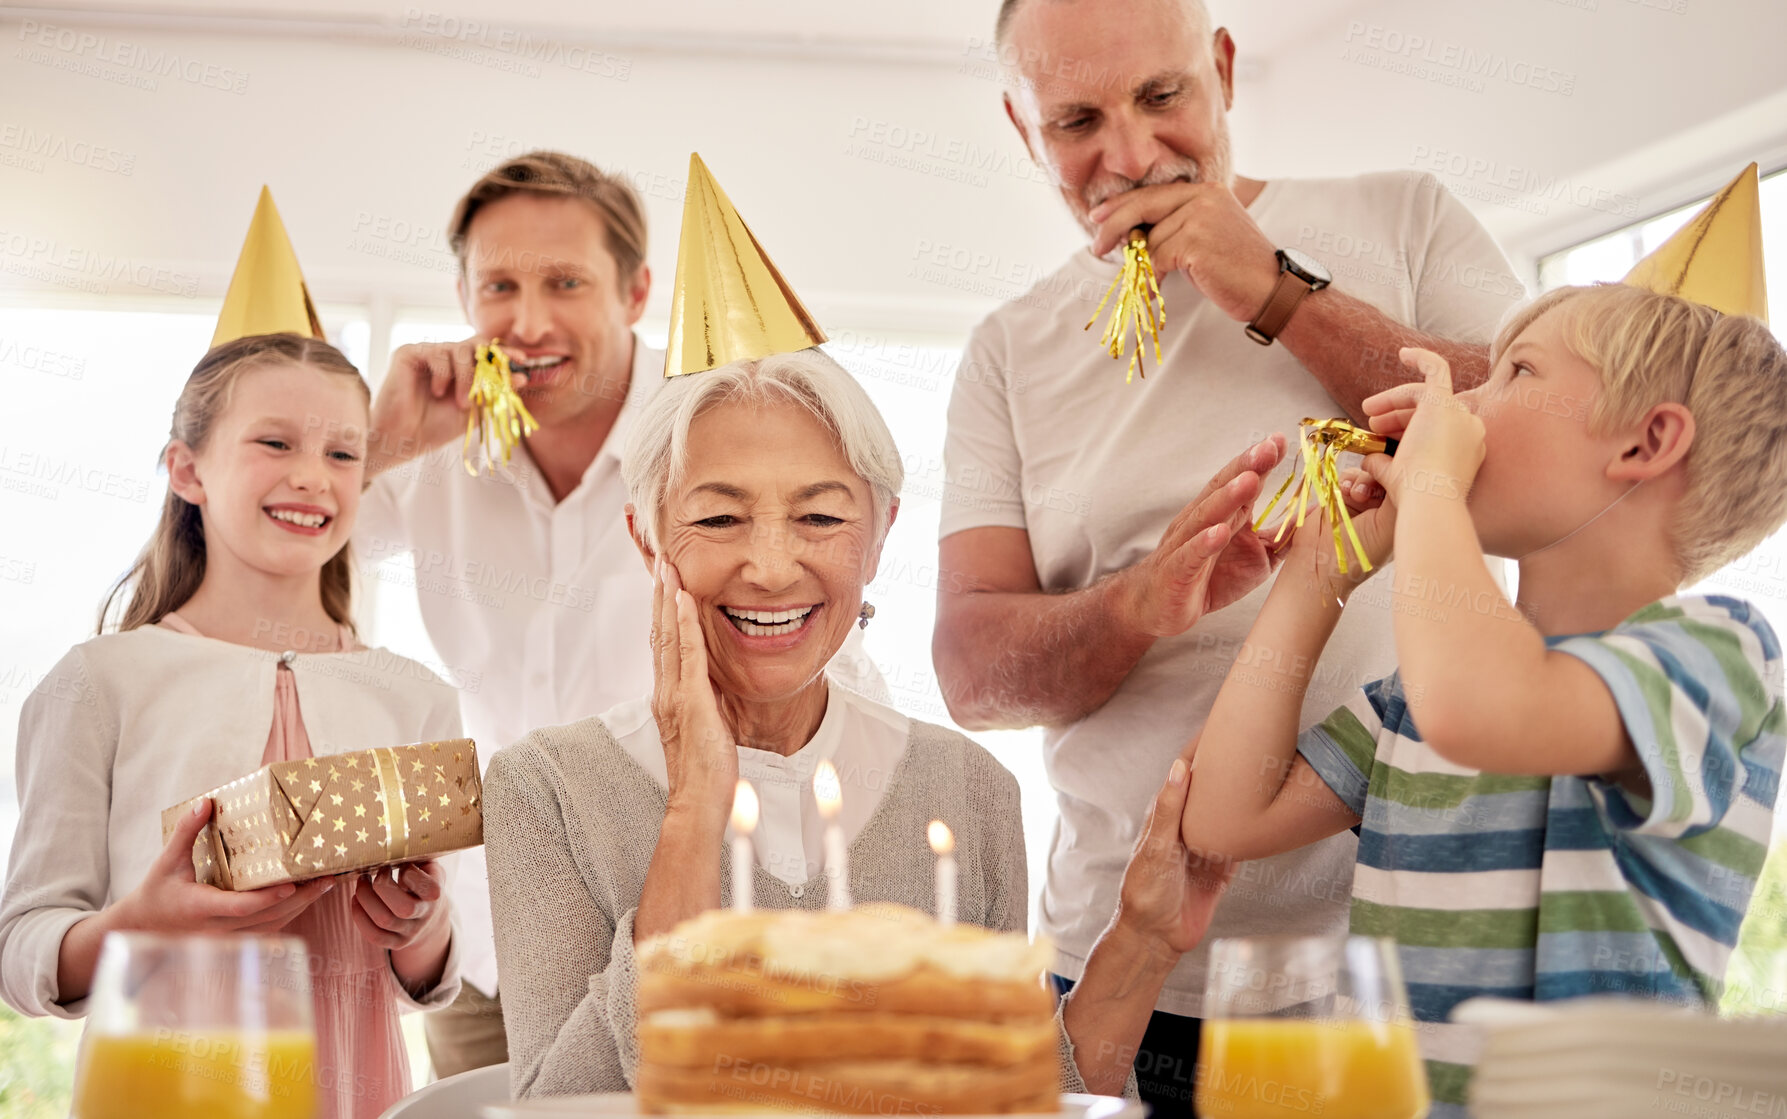 Buy stock photo Senior woman celebrating her birthday with family at home, wearing party hats and blowing whistles. Grandma looking at birthday cake and looking joyful while surrounded by her grandkids and and son